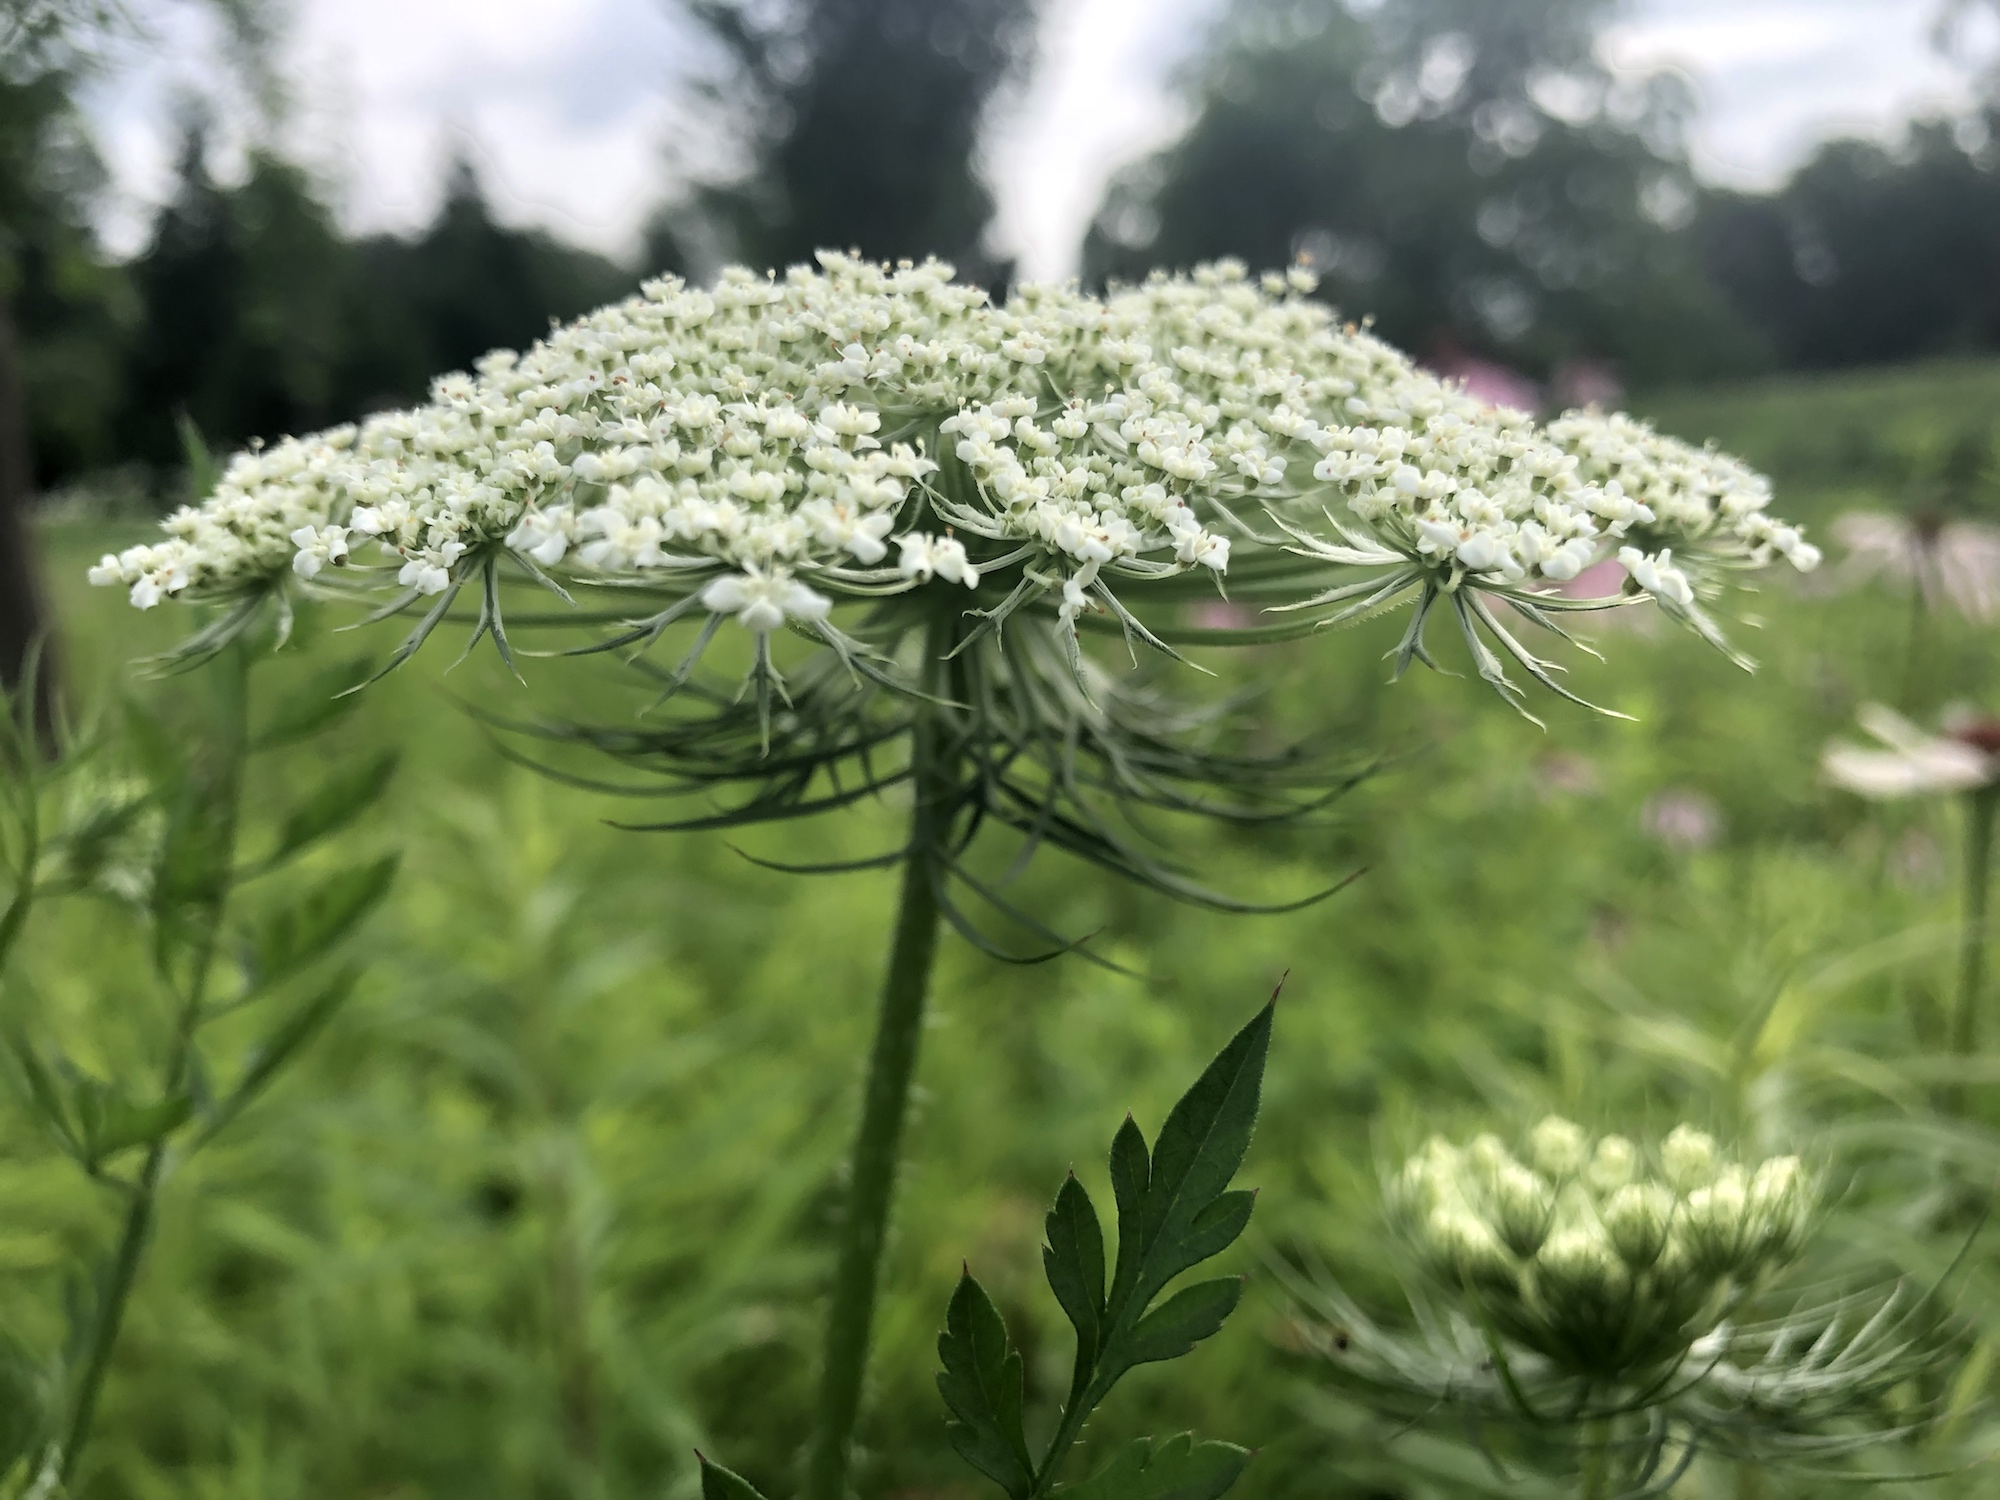 Queen Anne's Lace on bank of retaining pond on the corner of Nakoma Road and Manitou Way in Madison, WI on June 30, 2019.